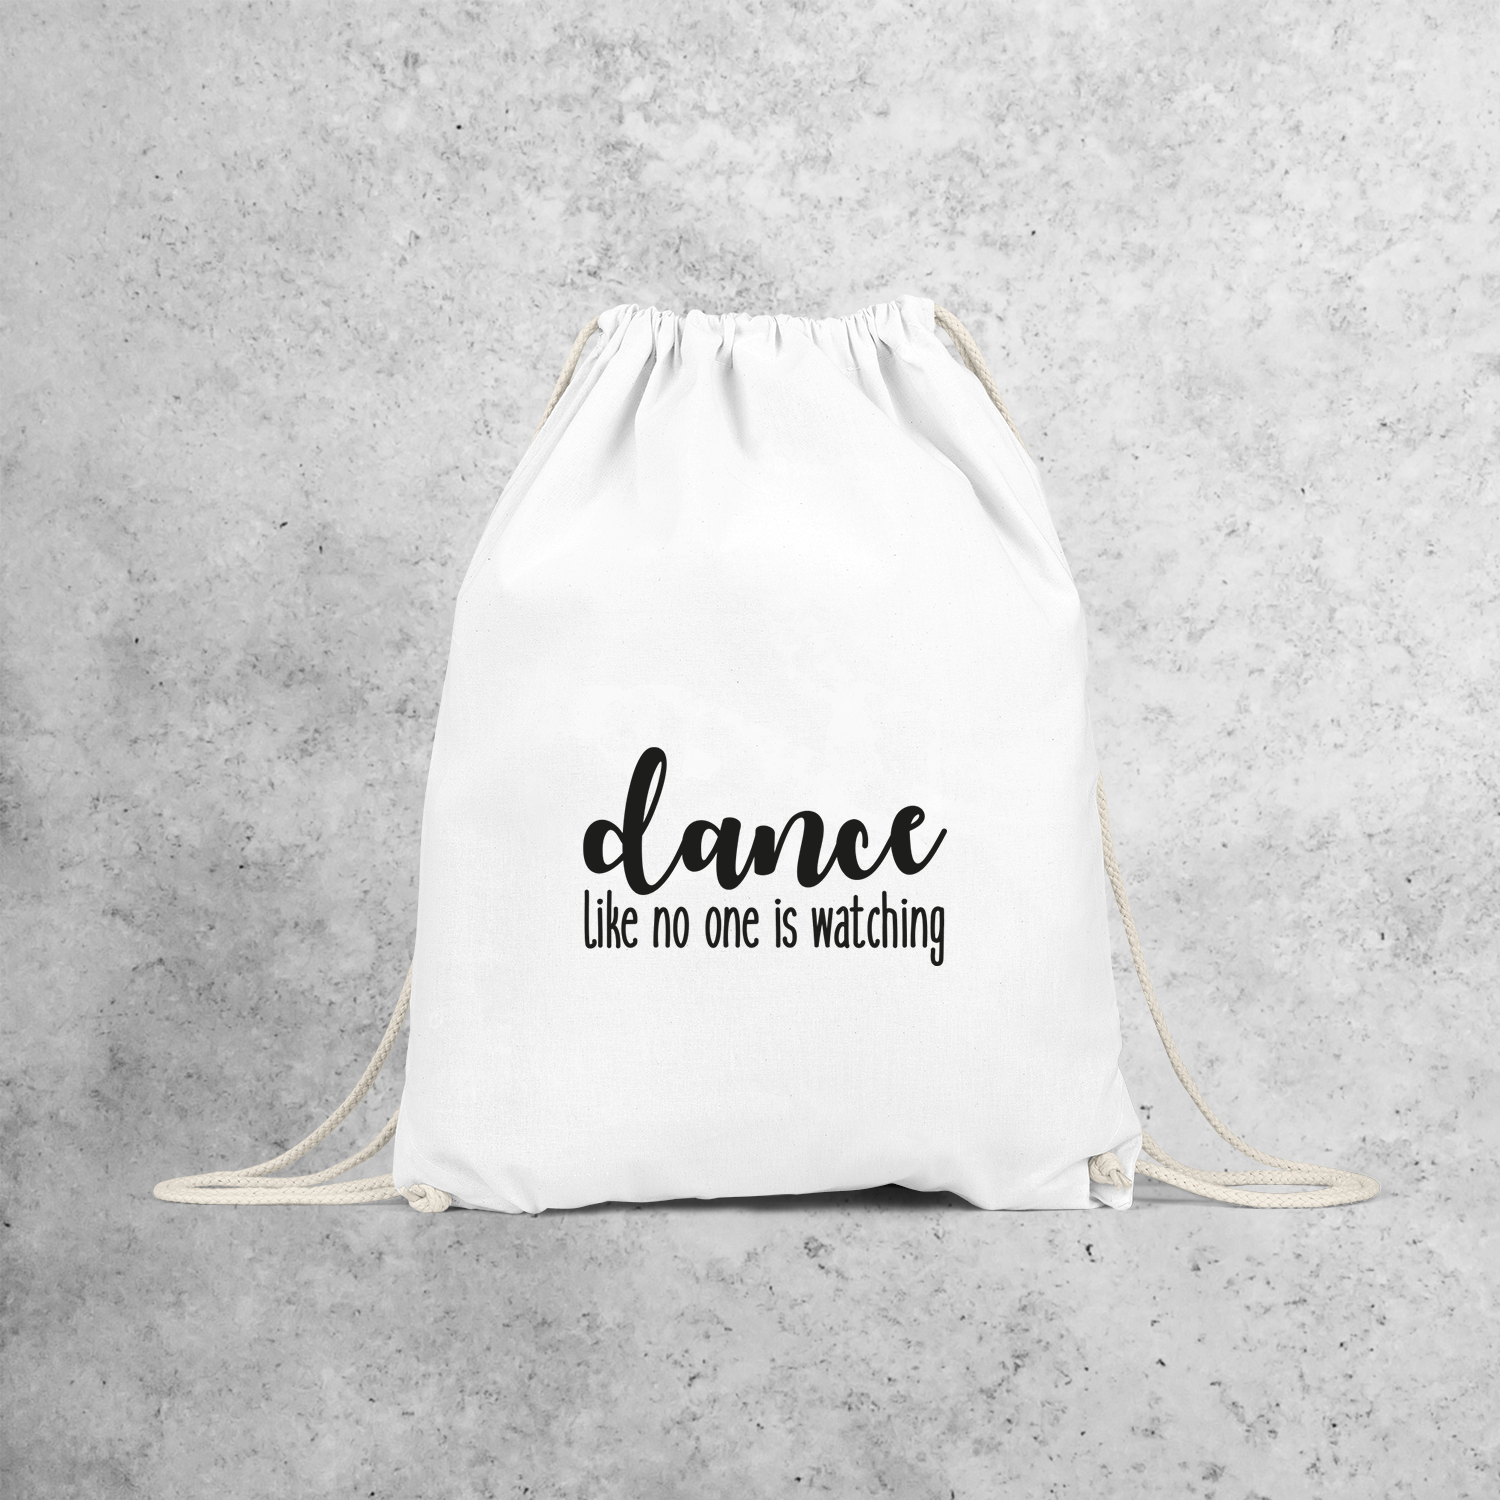 'Dance like no one is watching' backpack